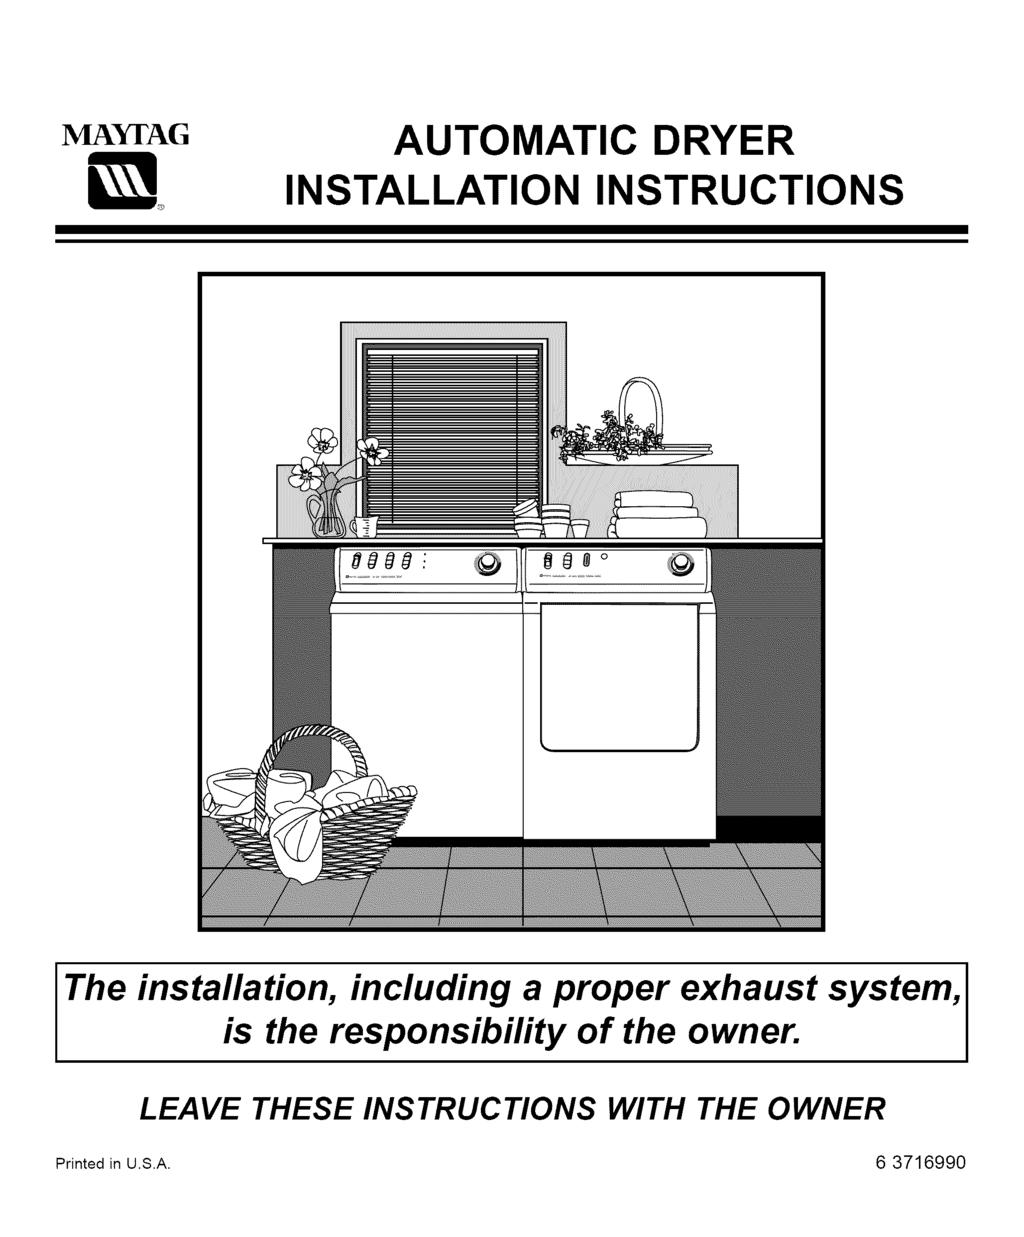 AUTOMATIC DRYER INSTALLATION INSTRUCTIONS The installation, including a proper exhaust system, is